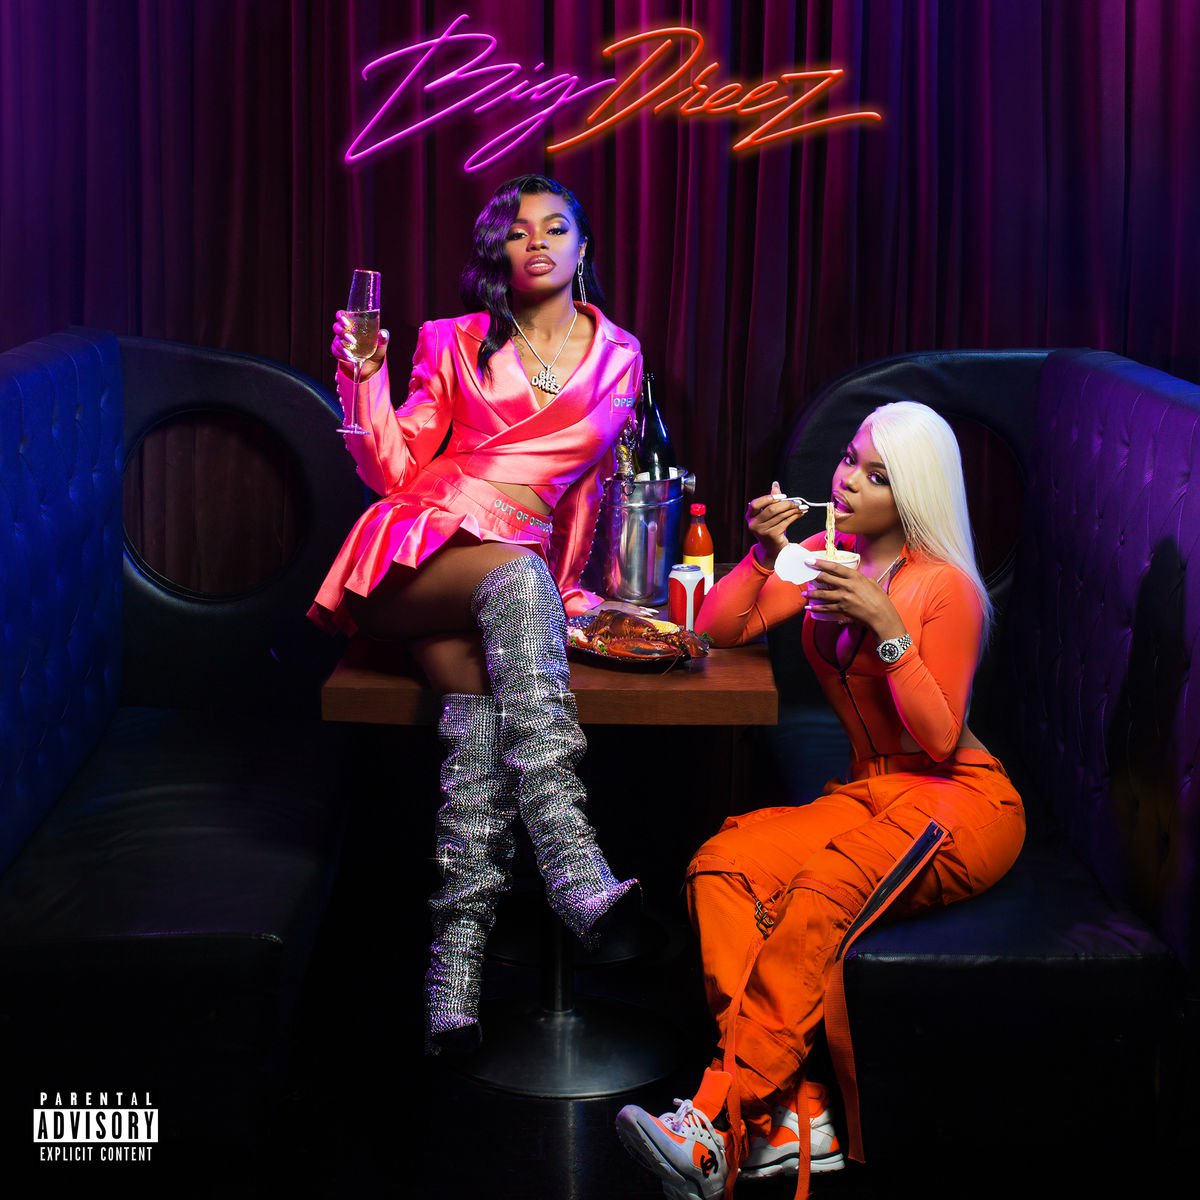 Dreezy Comes Through With “Big Dreez” Featuring Jeremih, Jacquees, Offset, & More